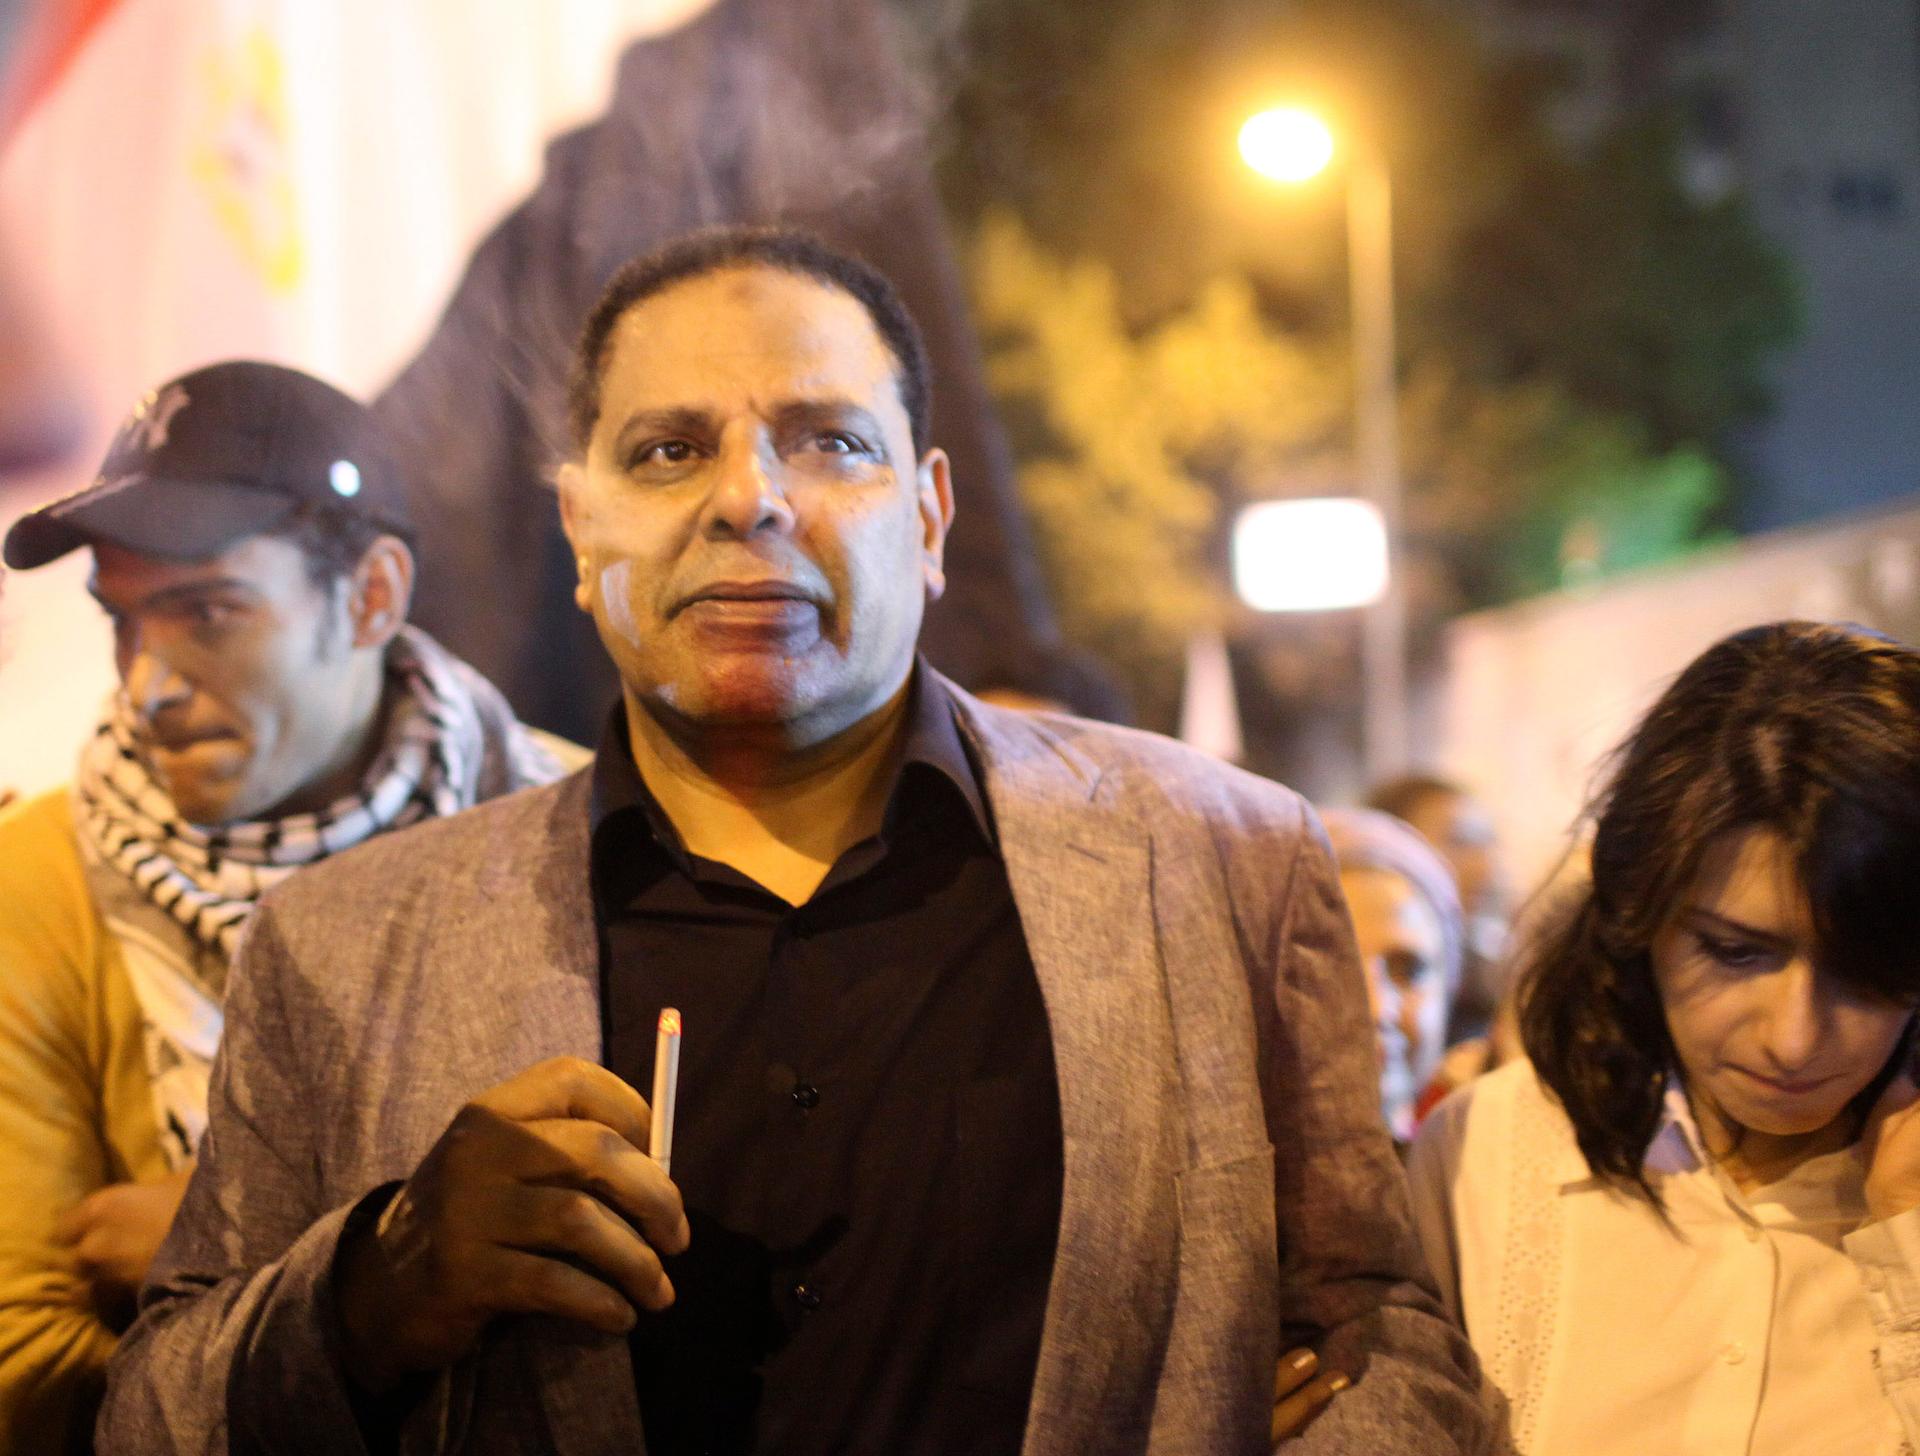 A man walks with a crowd at night with the Egyptian flag behind him. 